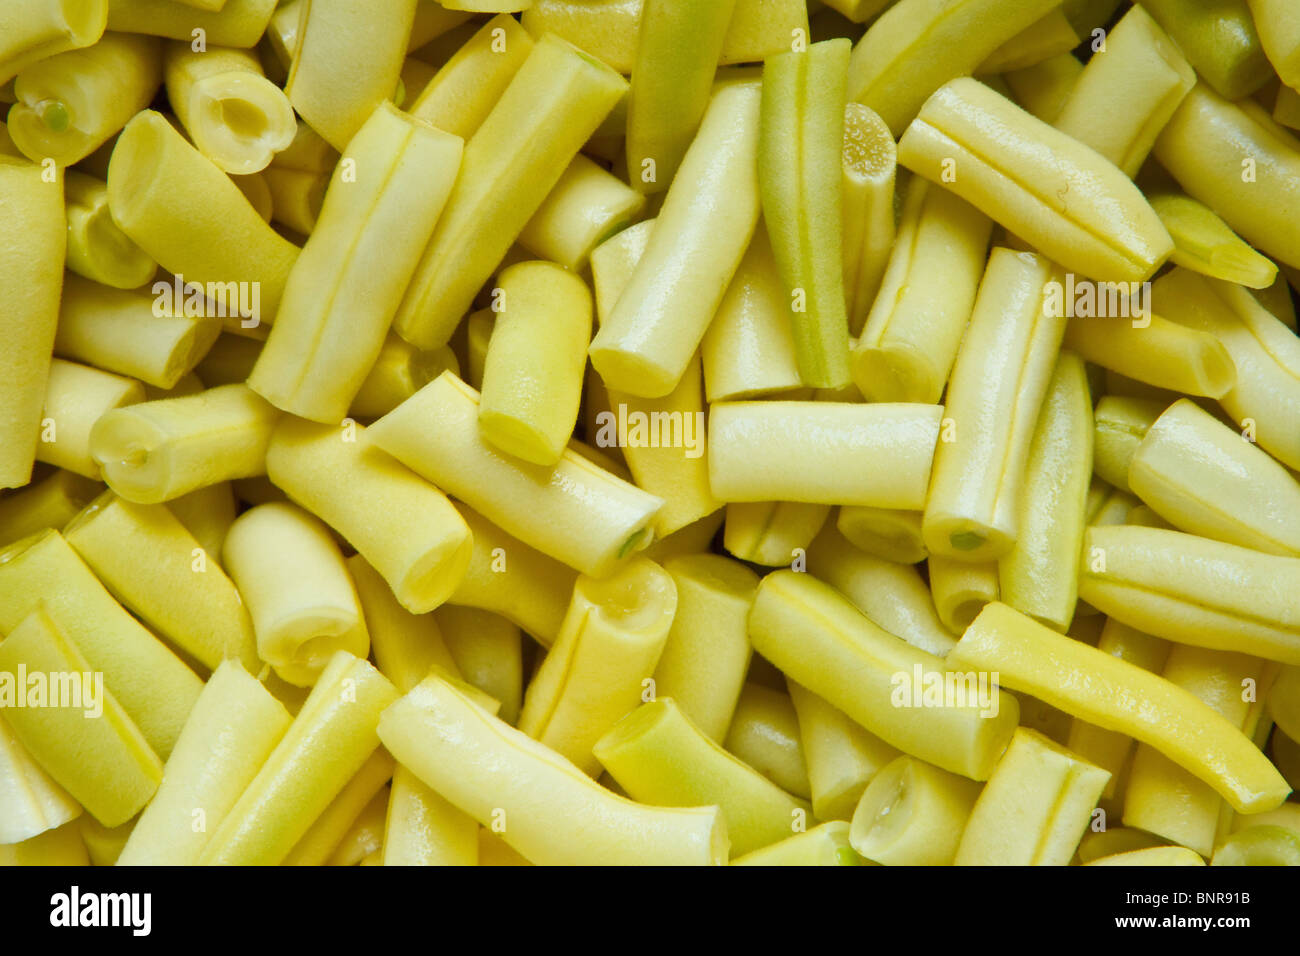 Common Wax beans prepared for cooking Stock Photo